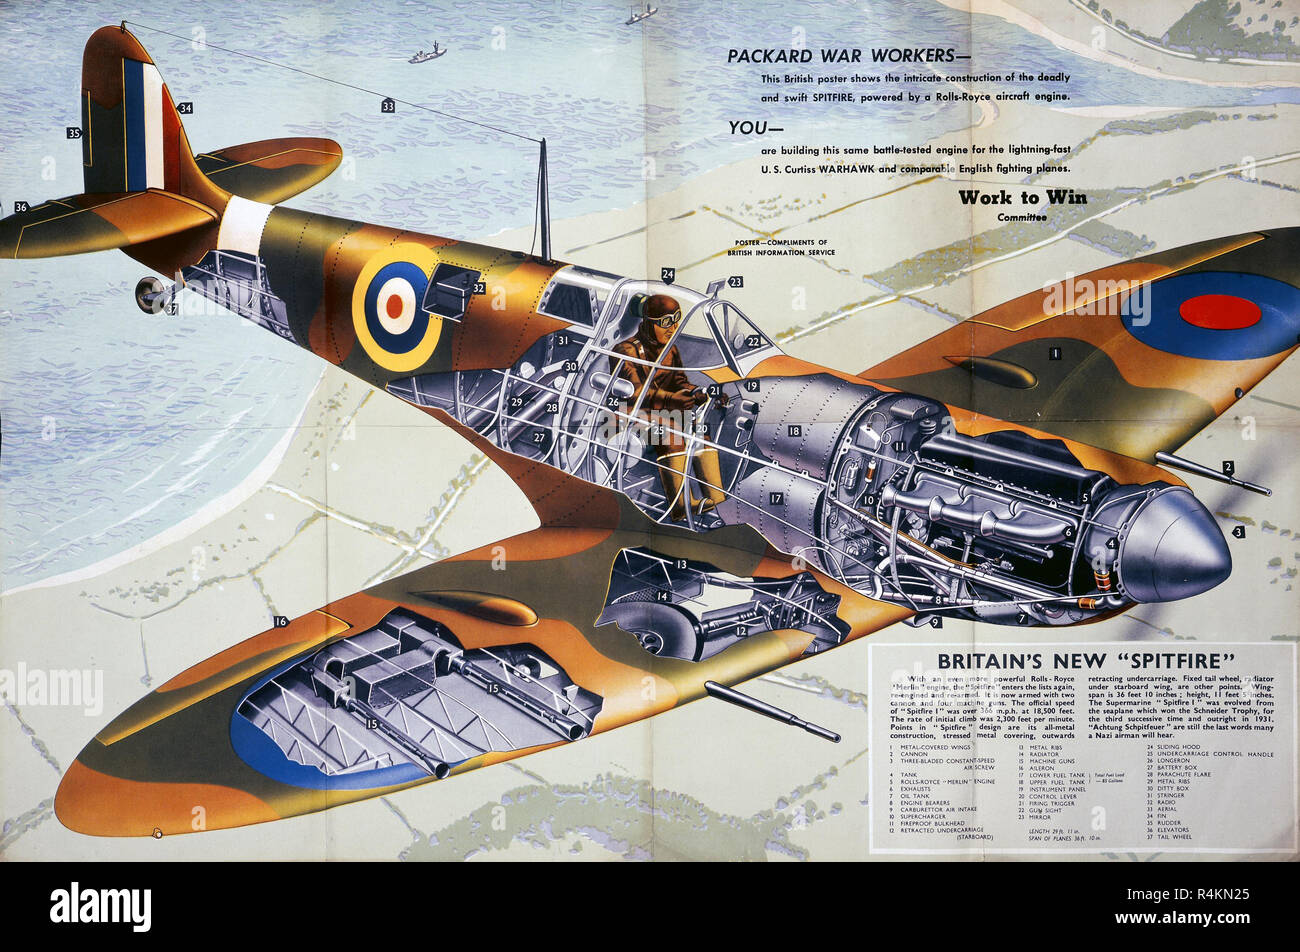 New Spitfire fighter plane poster from British Information Service 1940s production e by Central Office of Information for Packard war workers constructing the planes Stock Photo